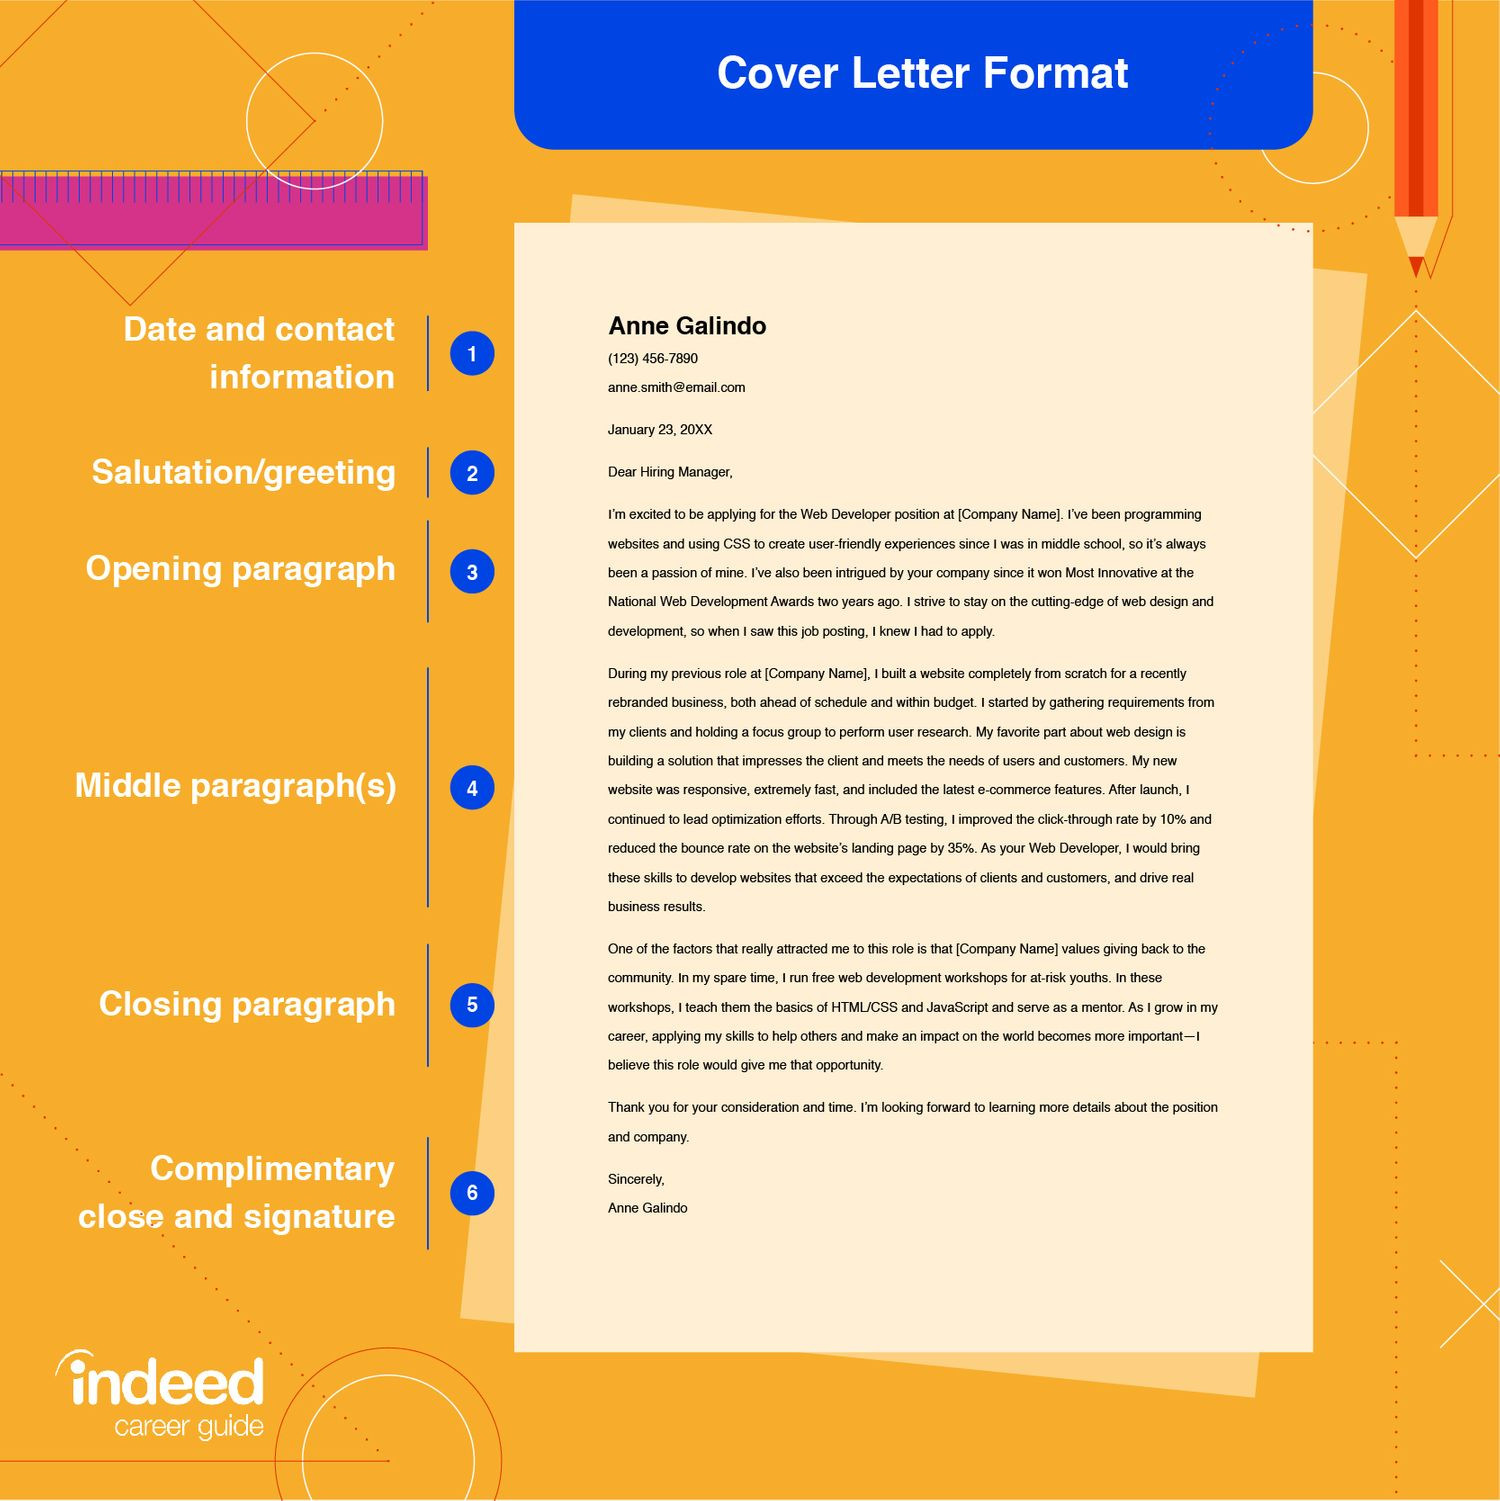 Email with attached Cover Letter and Resume Sample How to Send An Email Cover Letter (with Example) Indeed.com